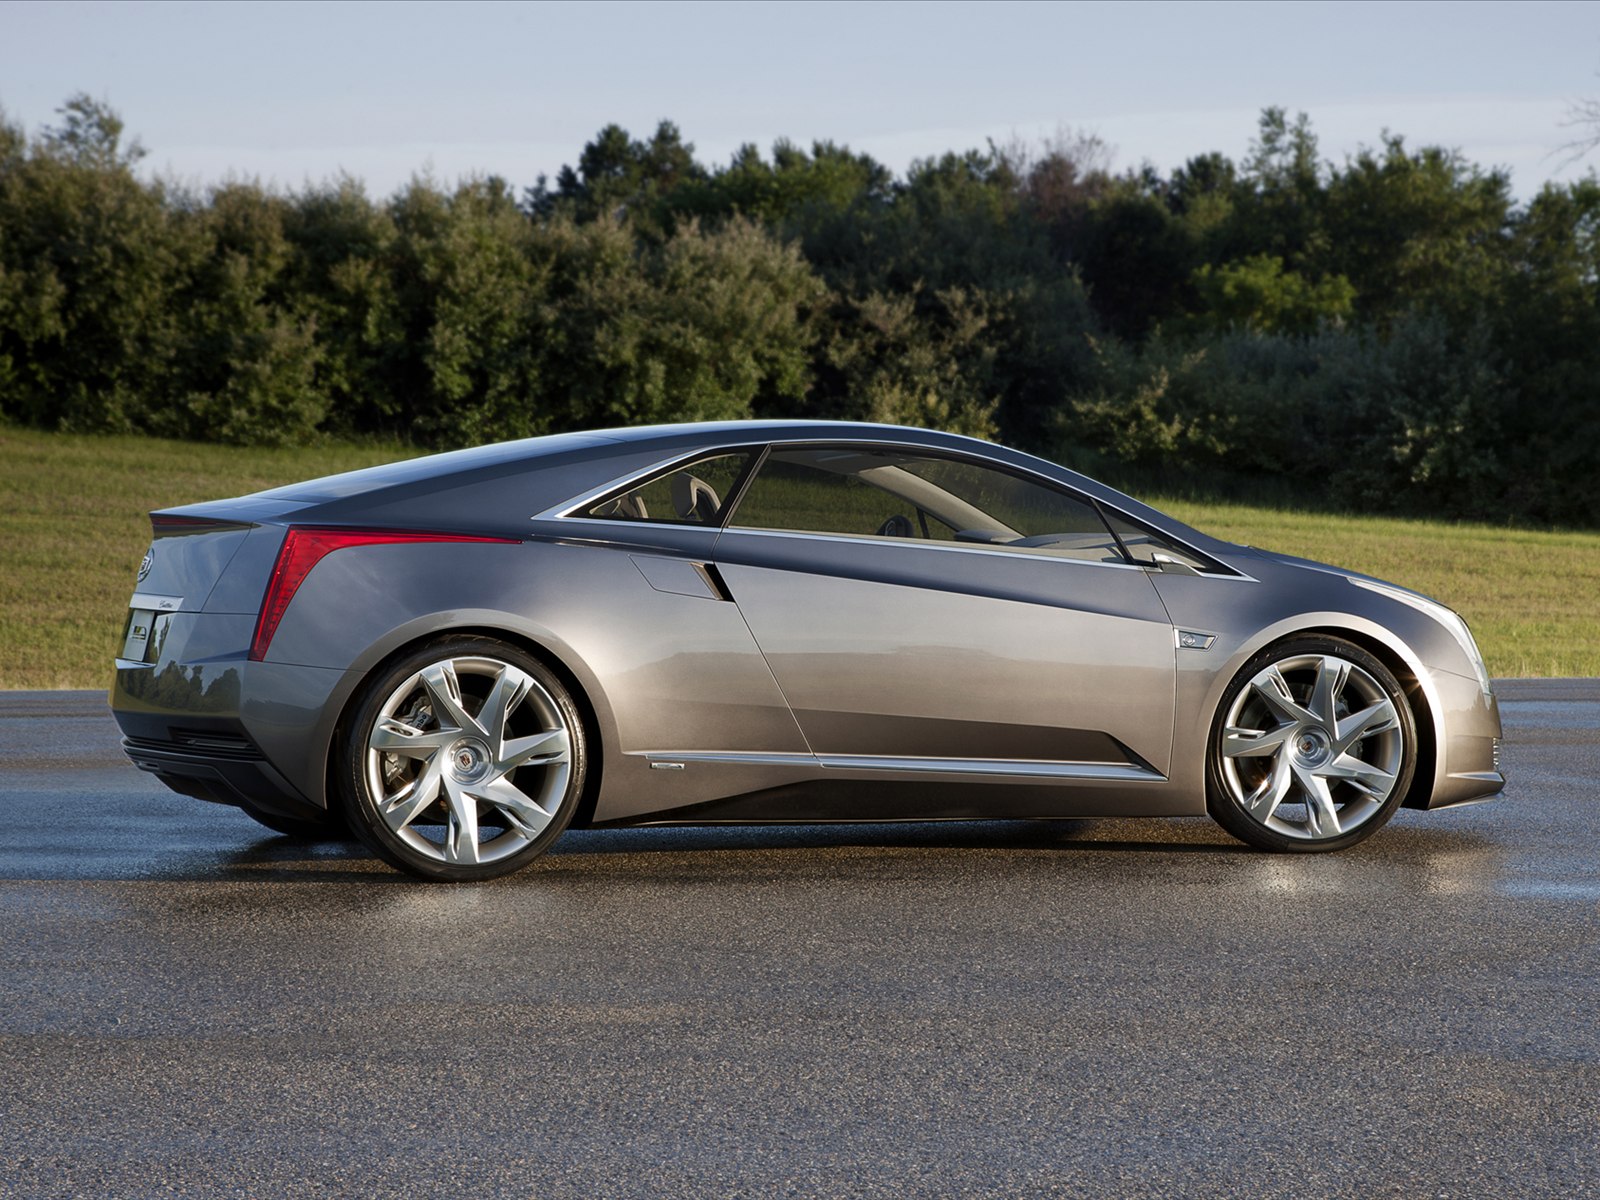 cadillac-elr-2012-electric-car-pictures-01.jpg (1600×1200)